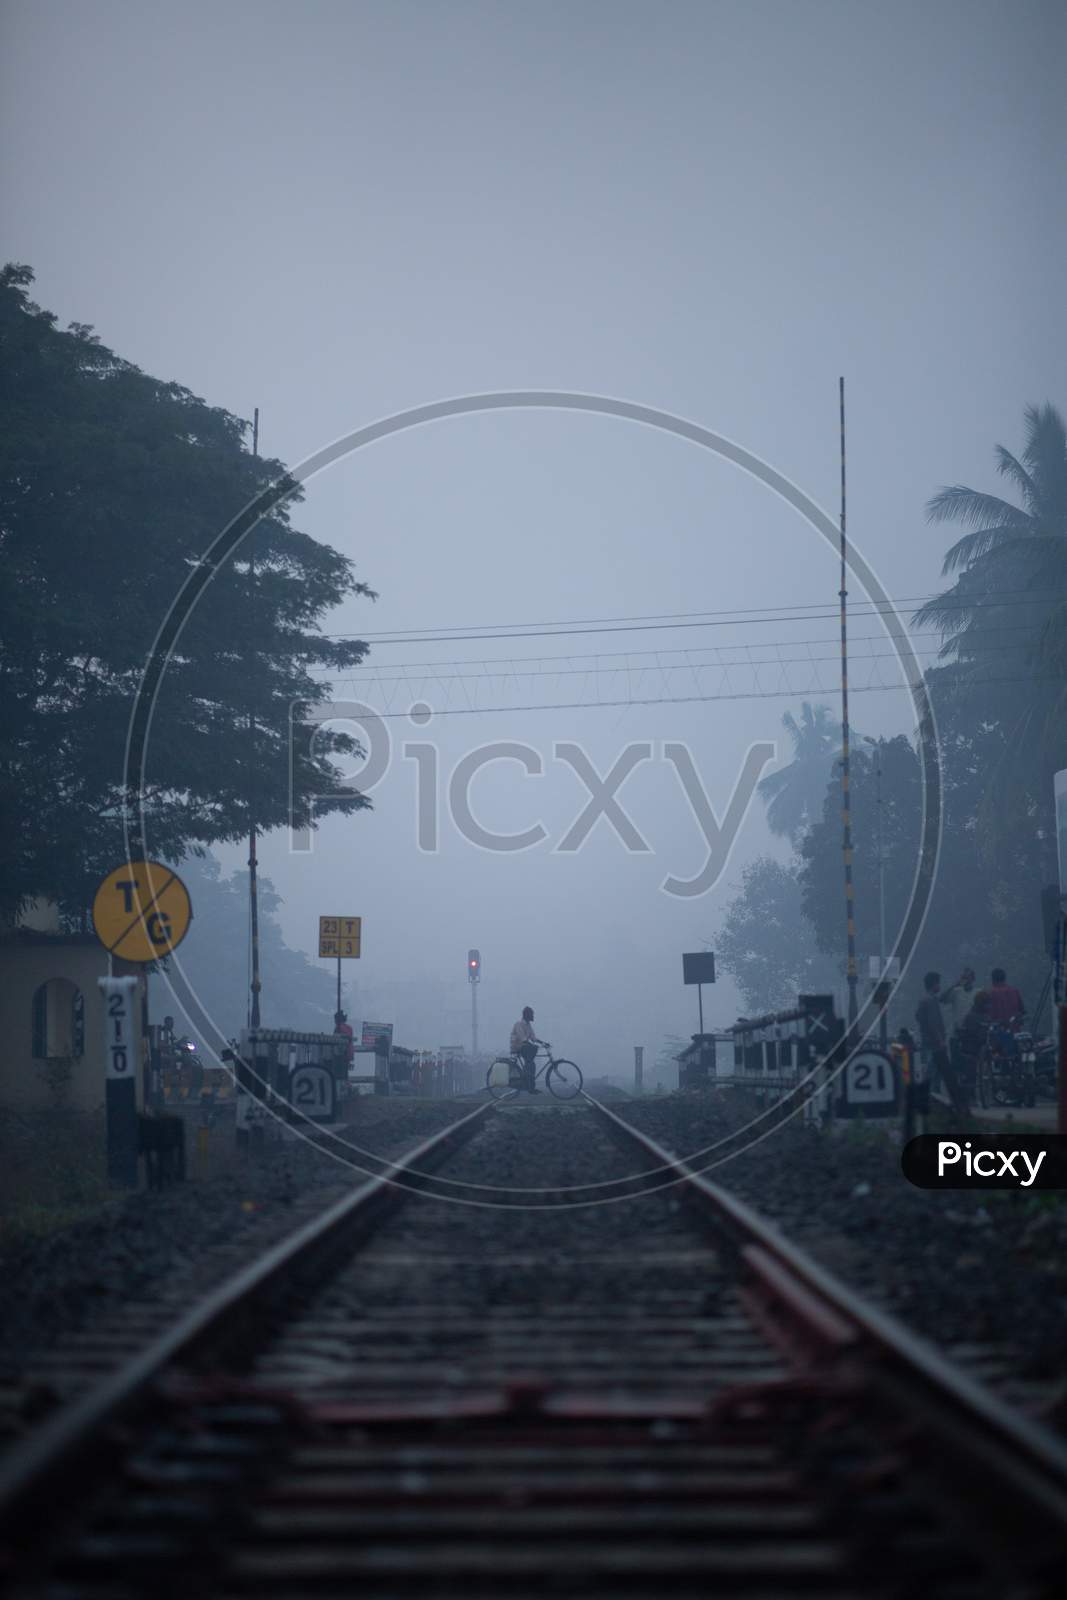 People Crossing The Railway Track At an Railway Gate  On an Winter Morning